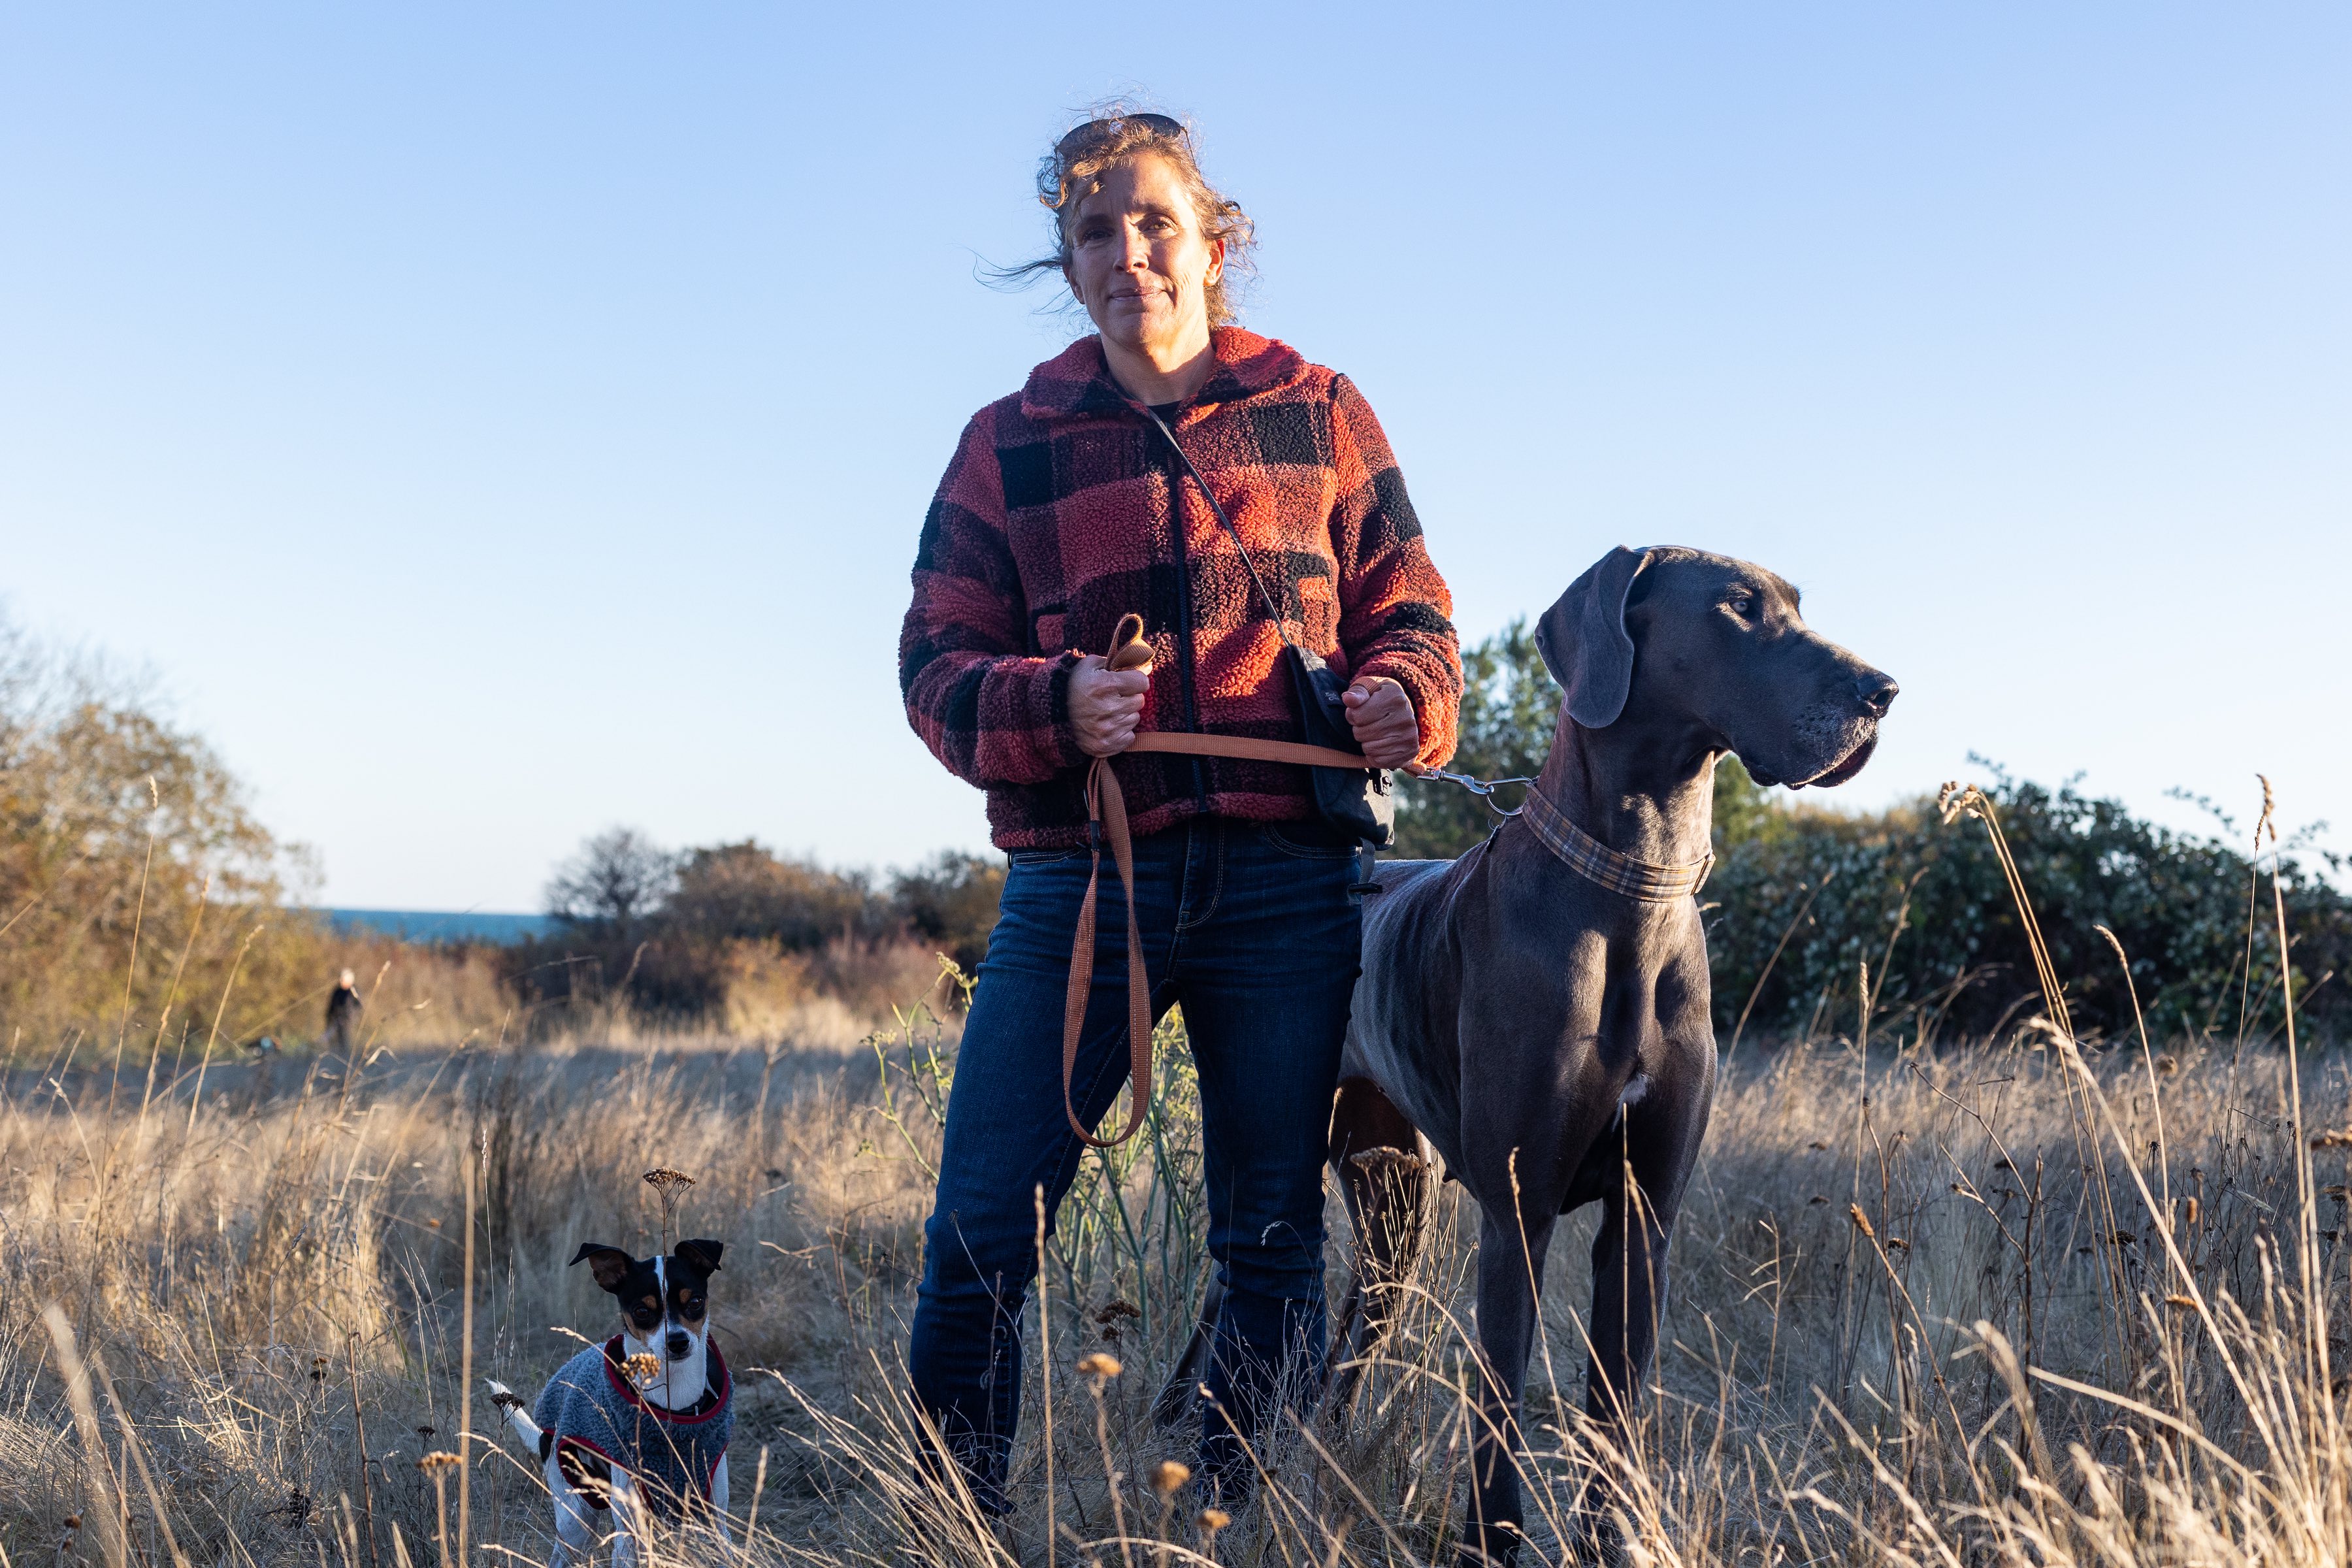 A woman wearing a red and black fleece jacket and jeans holds a Great Dane on a leash. A smaller dog is beside her. She stands in a meadow of brown grass, with the ocean in the background.